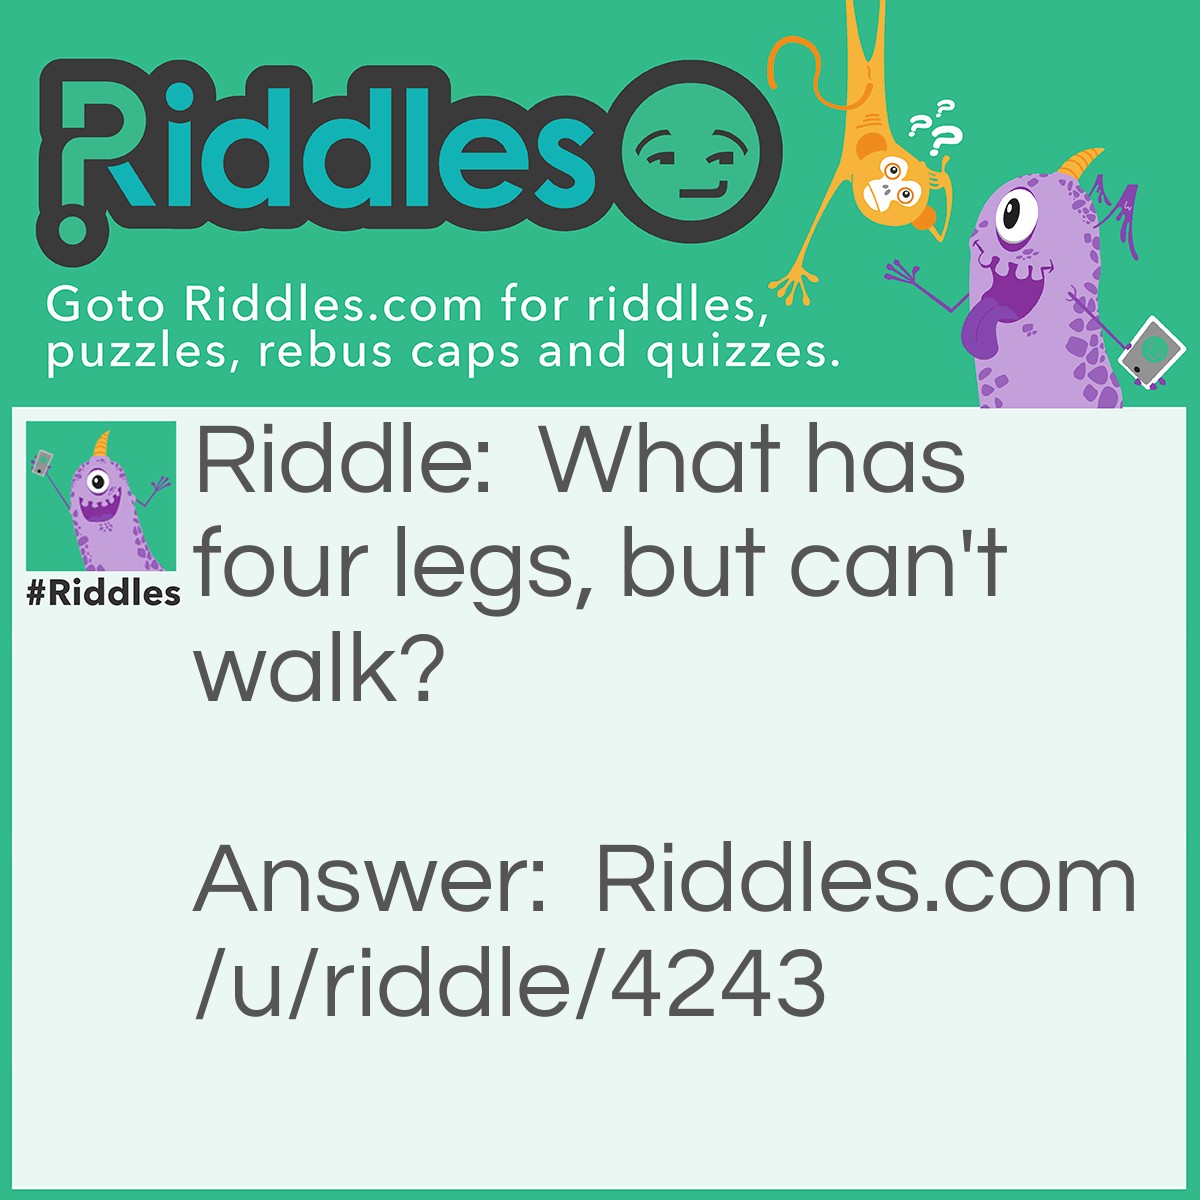 Riddle: What has four legs, but can't walk? Answer: A table.